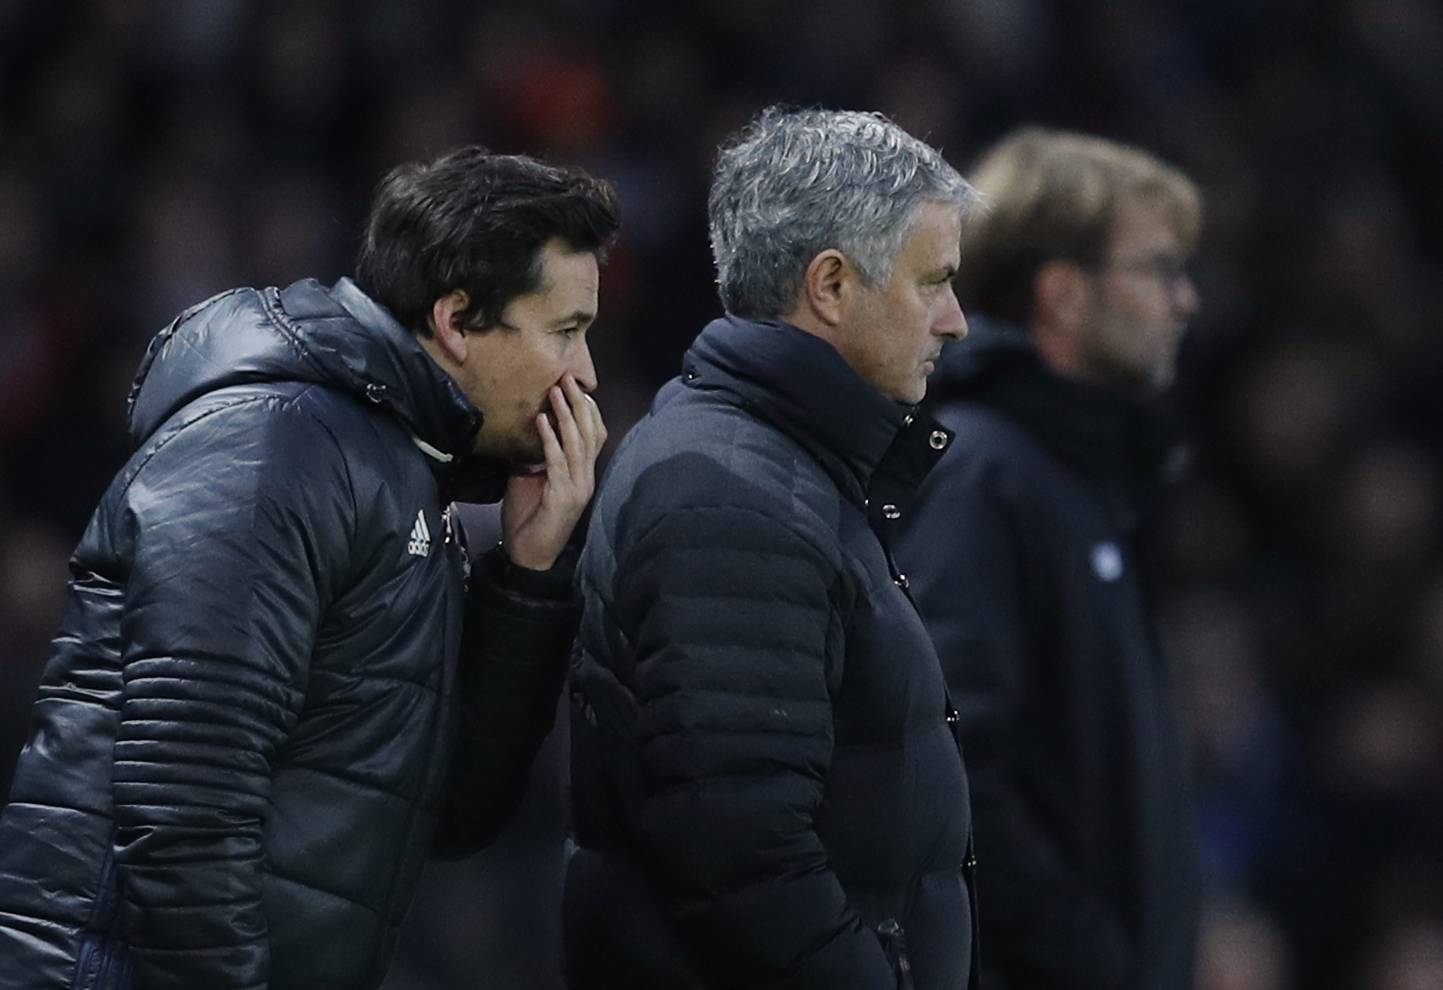 Manchester United manager Jose Mourinho and assistant manager Rui Faria